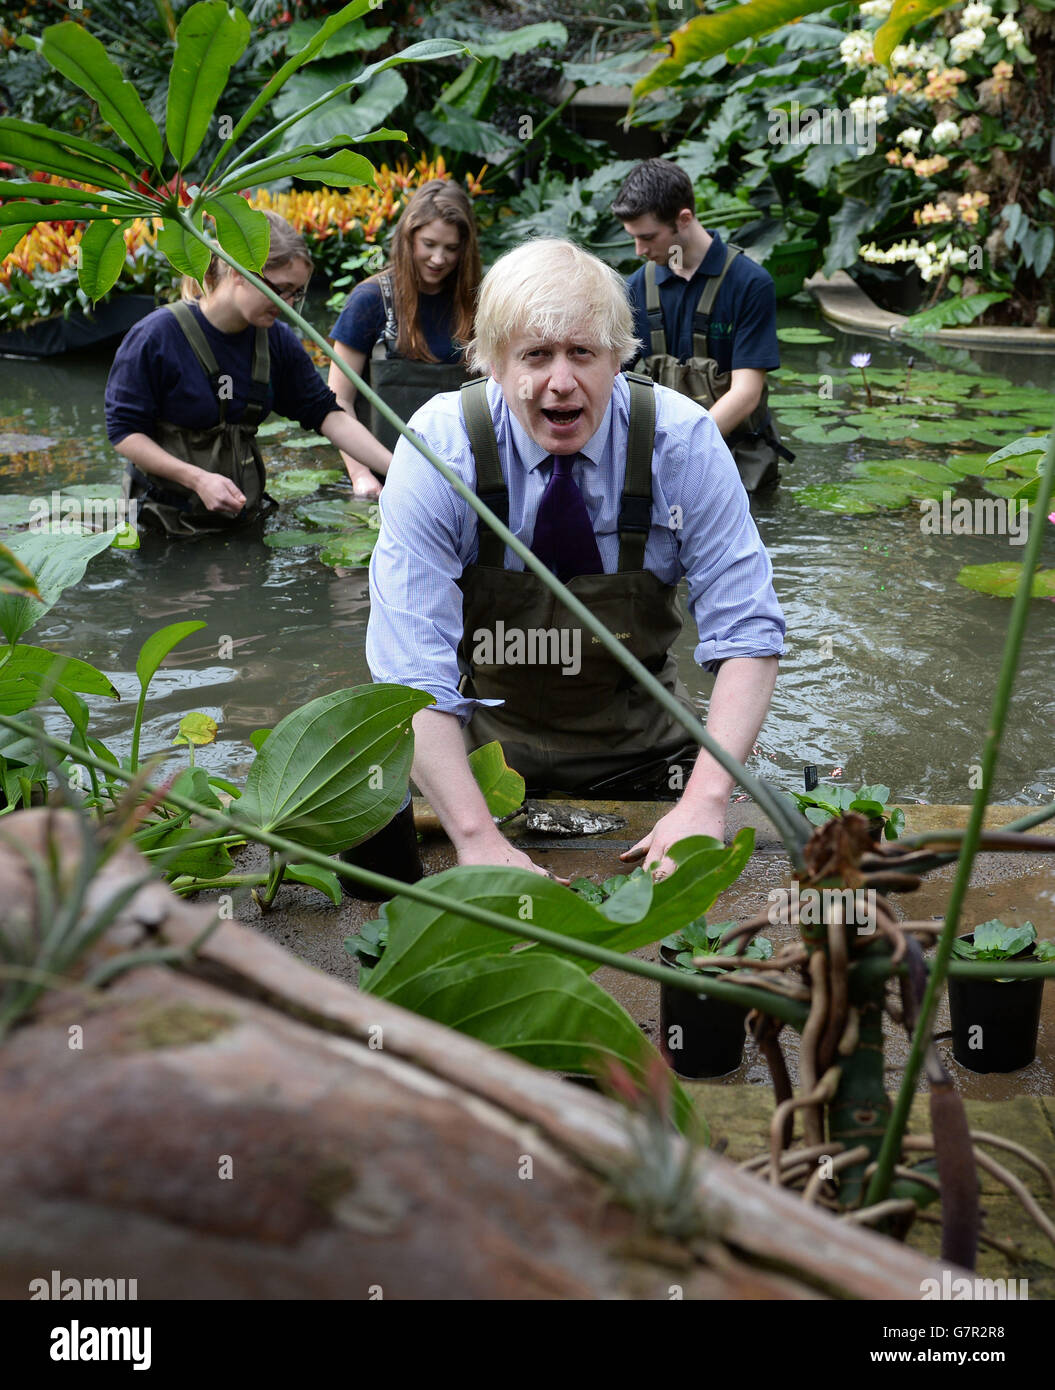 Mayor of London Boris Johnson plants flowers at the Royal Botanical Gardens where he joined Kew apprentices, diploma students, and Kew horticulturist Carlos Magdalena to plant young Victoria Amazonica Waterlilies, a colourful hybrid of waterlilies and lotus plants, in the Princess of Wales Conservatory at Kew Gardens. Stock Photo